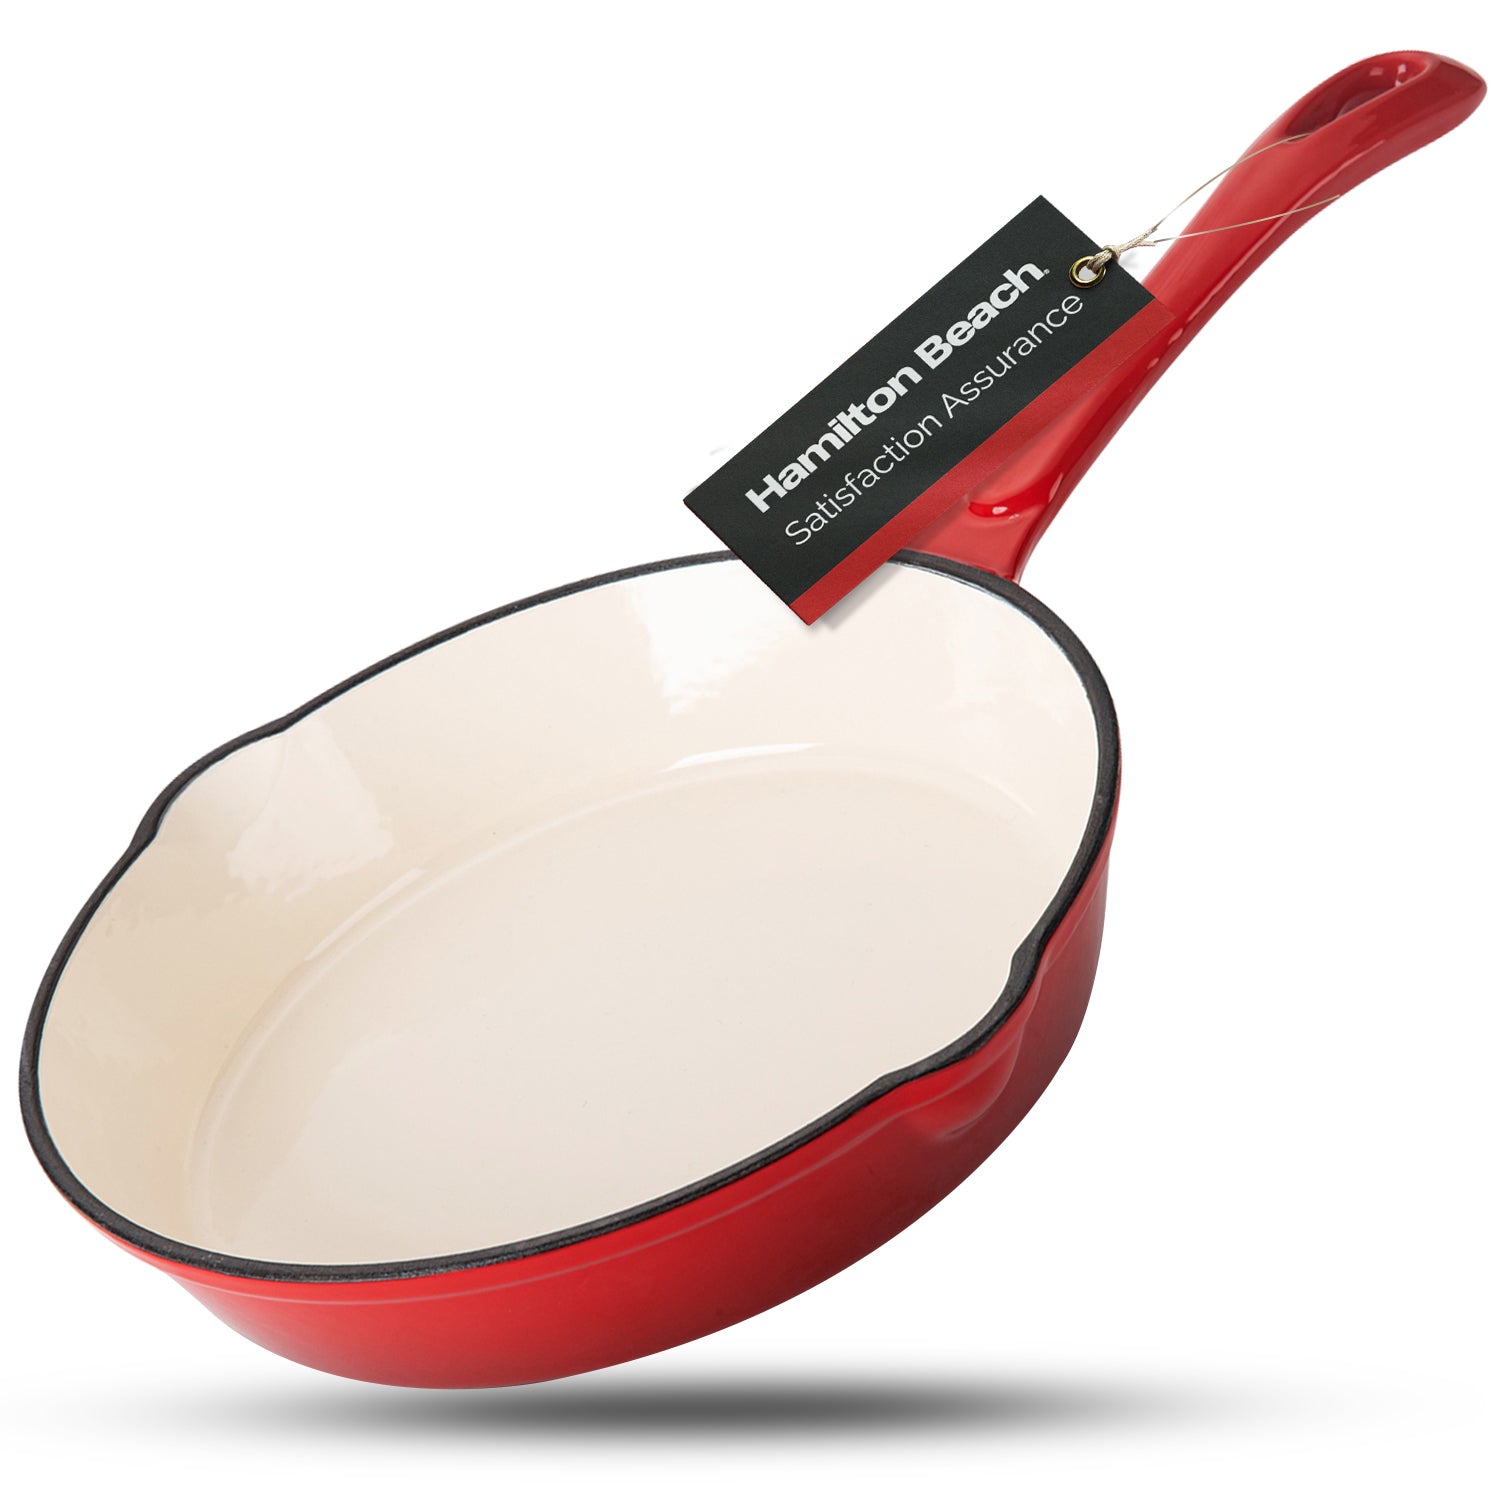 Hamilton Beach Enameled Cast Iron Fry Pan 10-Inch Red,  Cream Enamel coating, Skillet Pan For Stove top and Oven, Even Heat Distribution, Safe Up to 400 Degrees, Durable and Dishwasher Safe